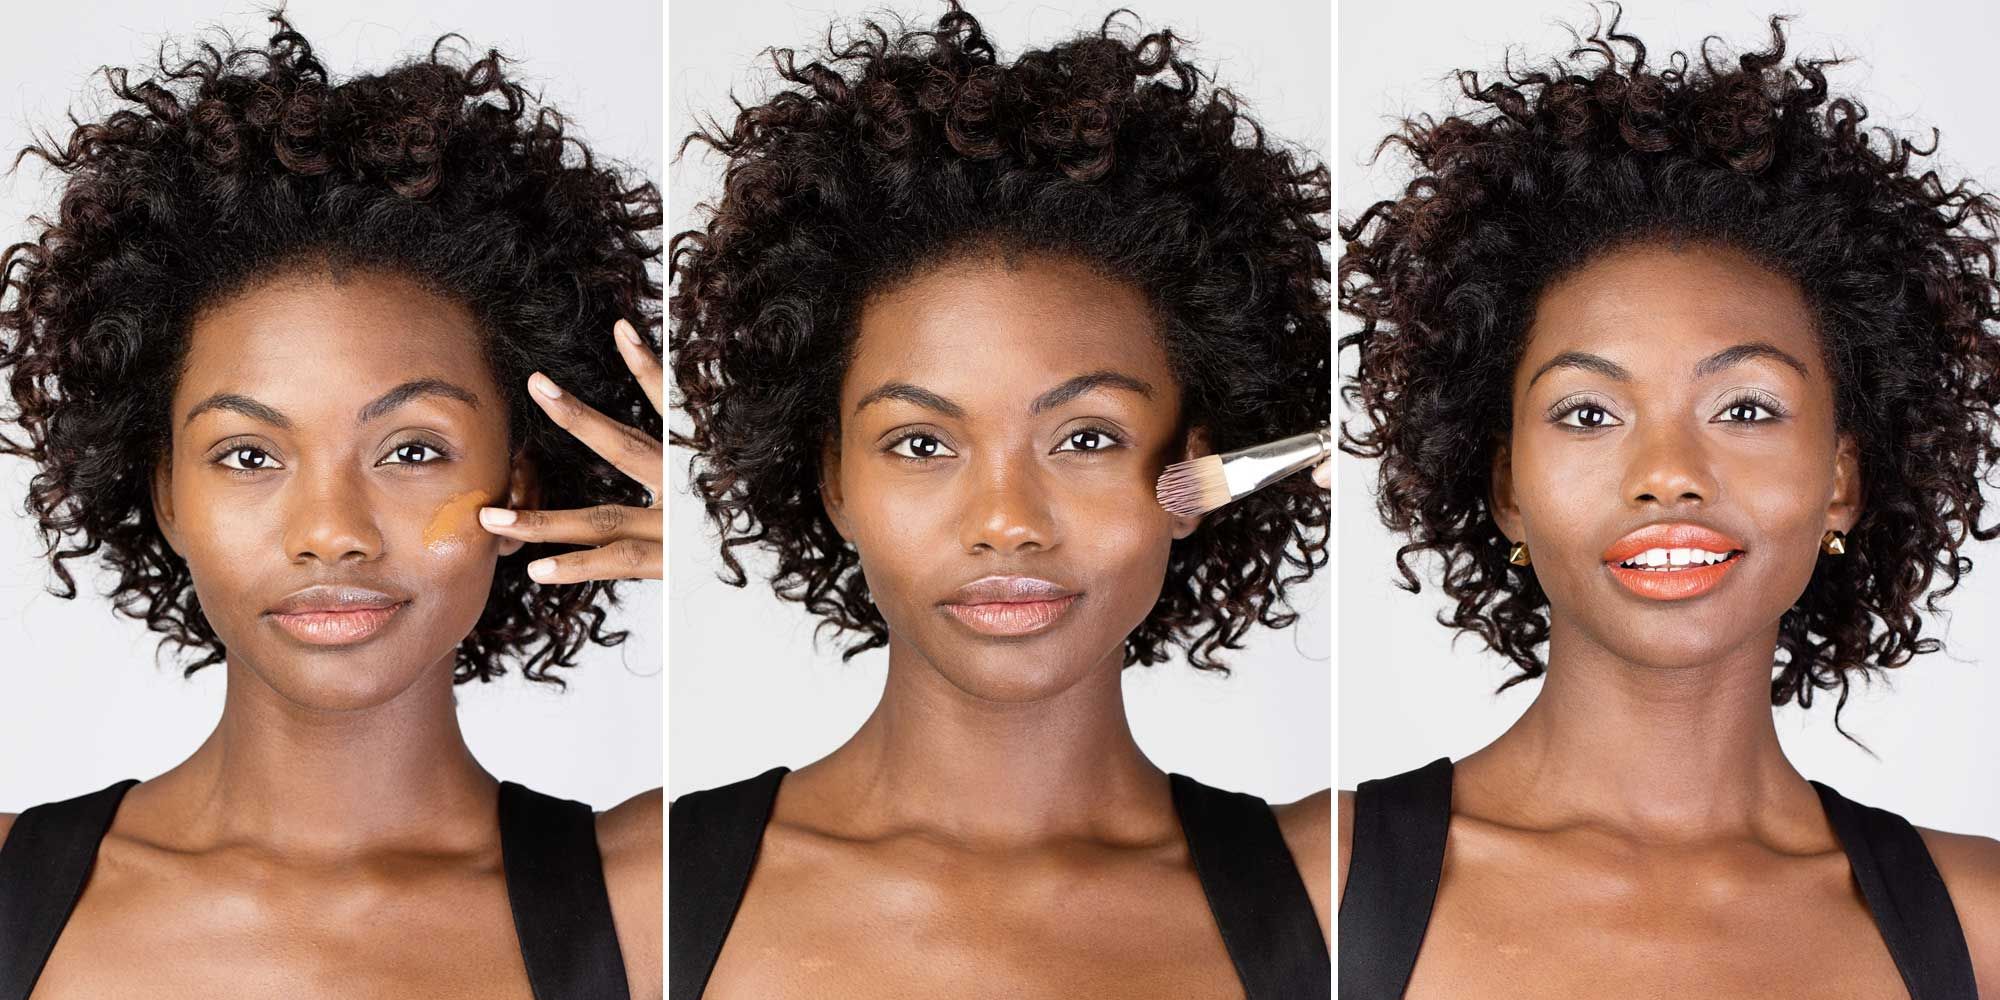 6 essential tips for choosing the perfect foundation shade